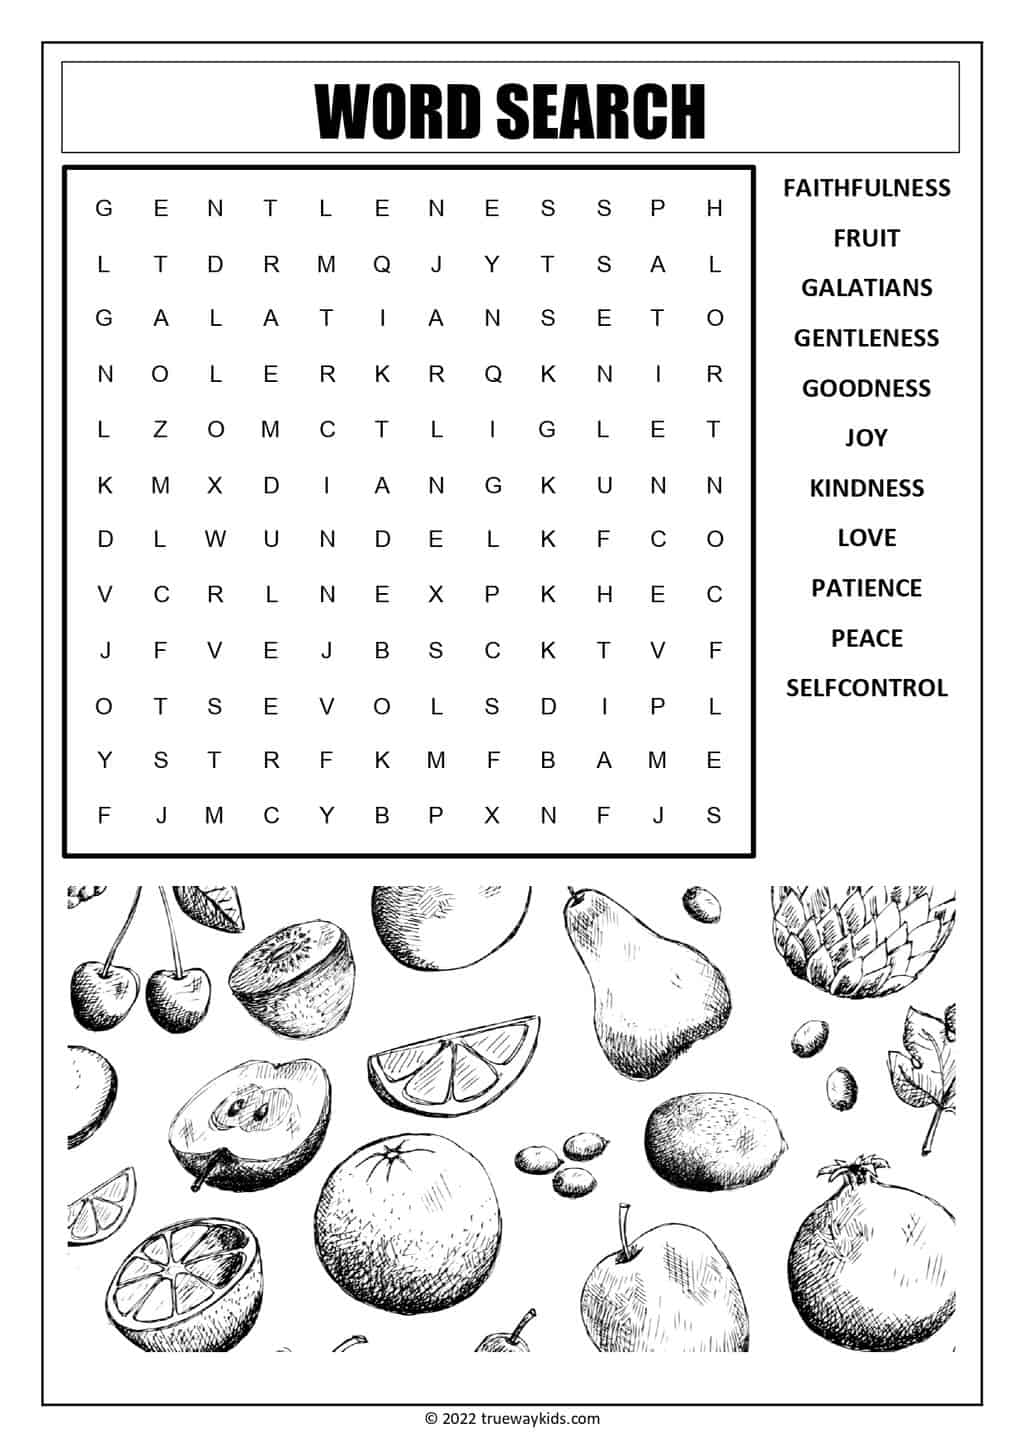 Fruit of the Spirit teen word search